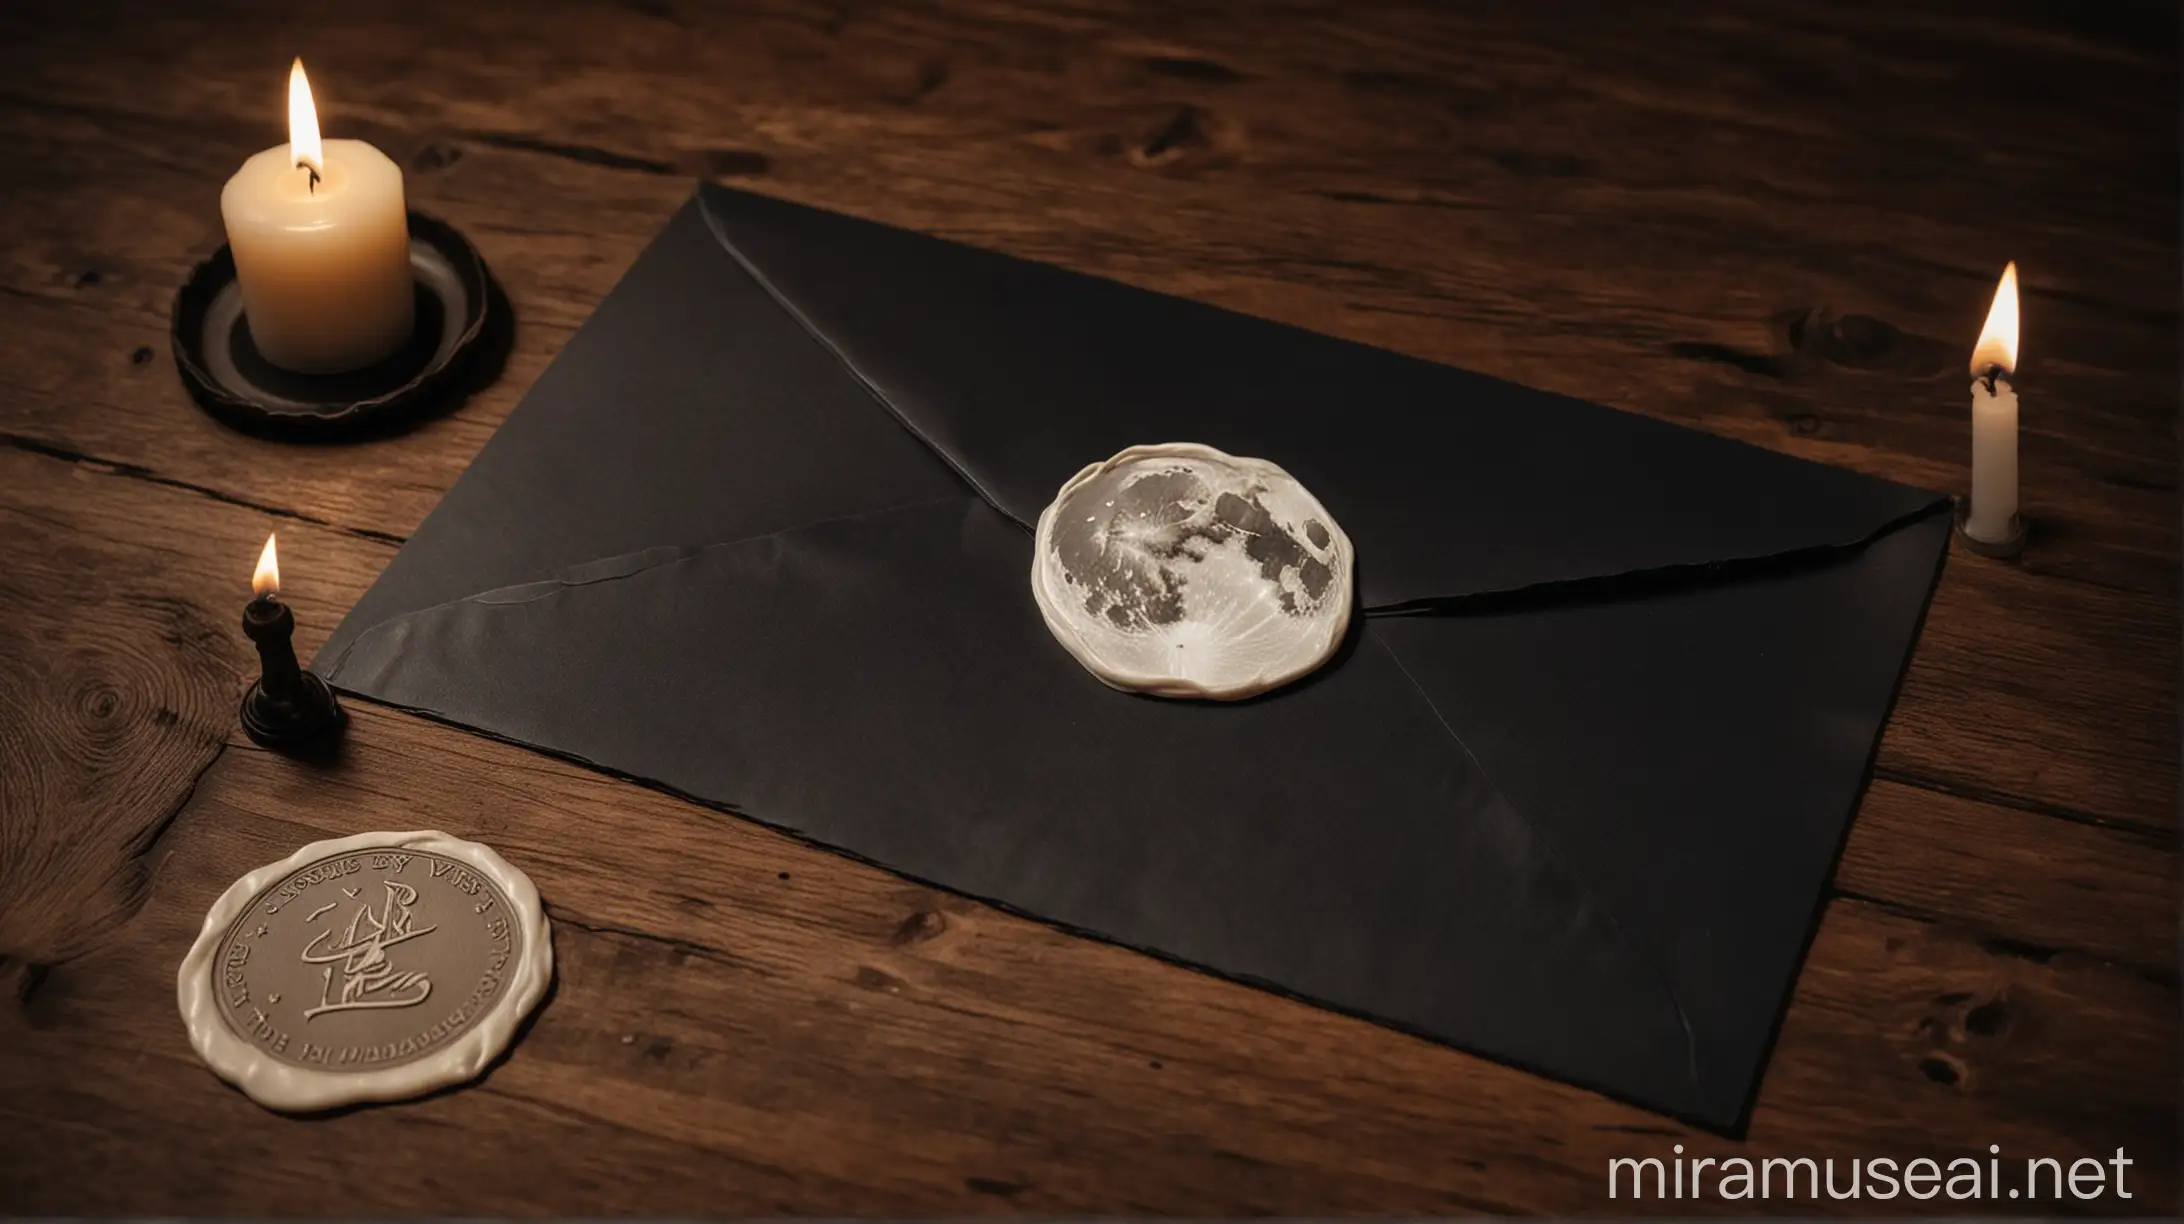 A closed black paper letter with a white full moon-shaped wax seal resting flat on a wooden table during a dark night with candle light
